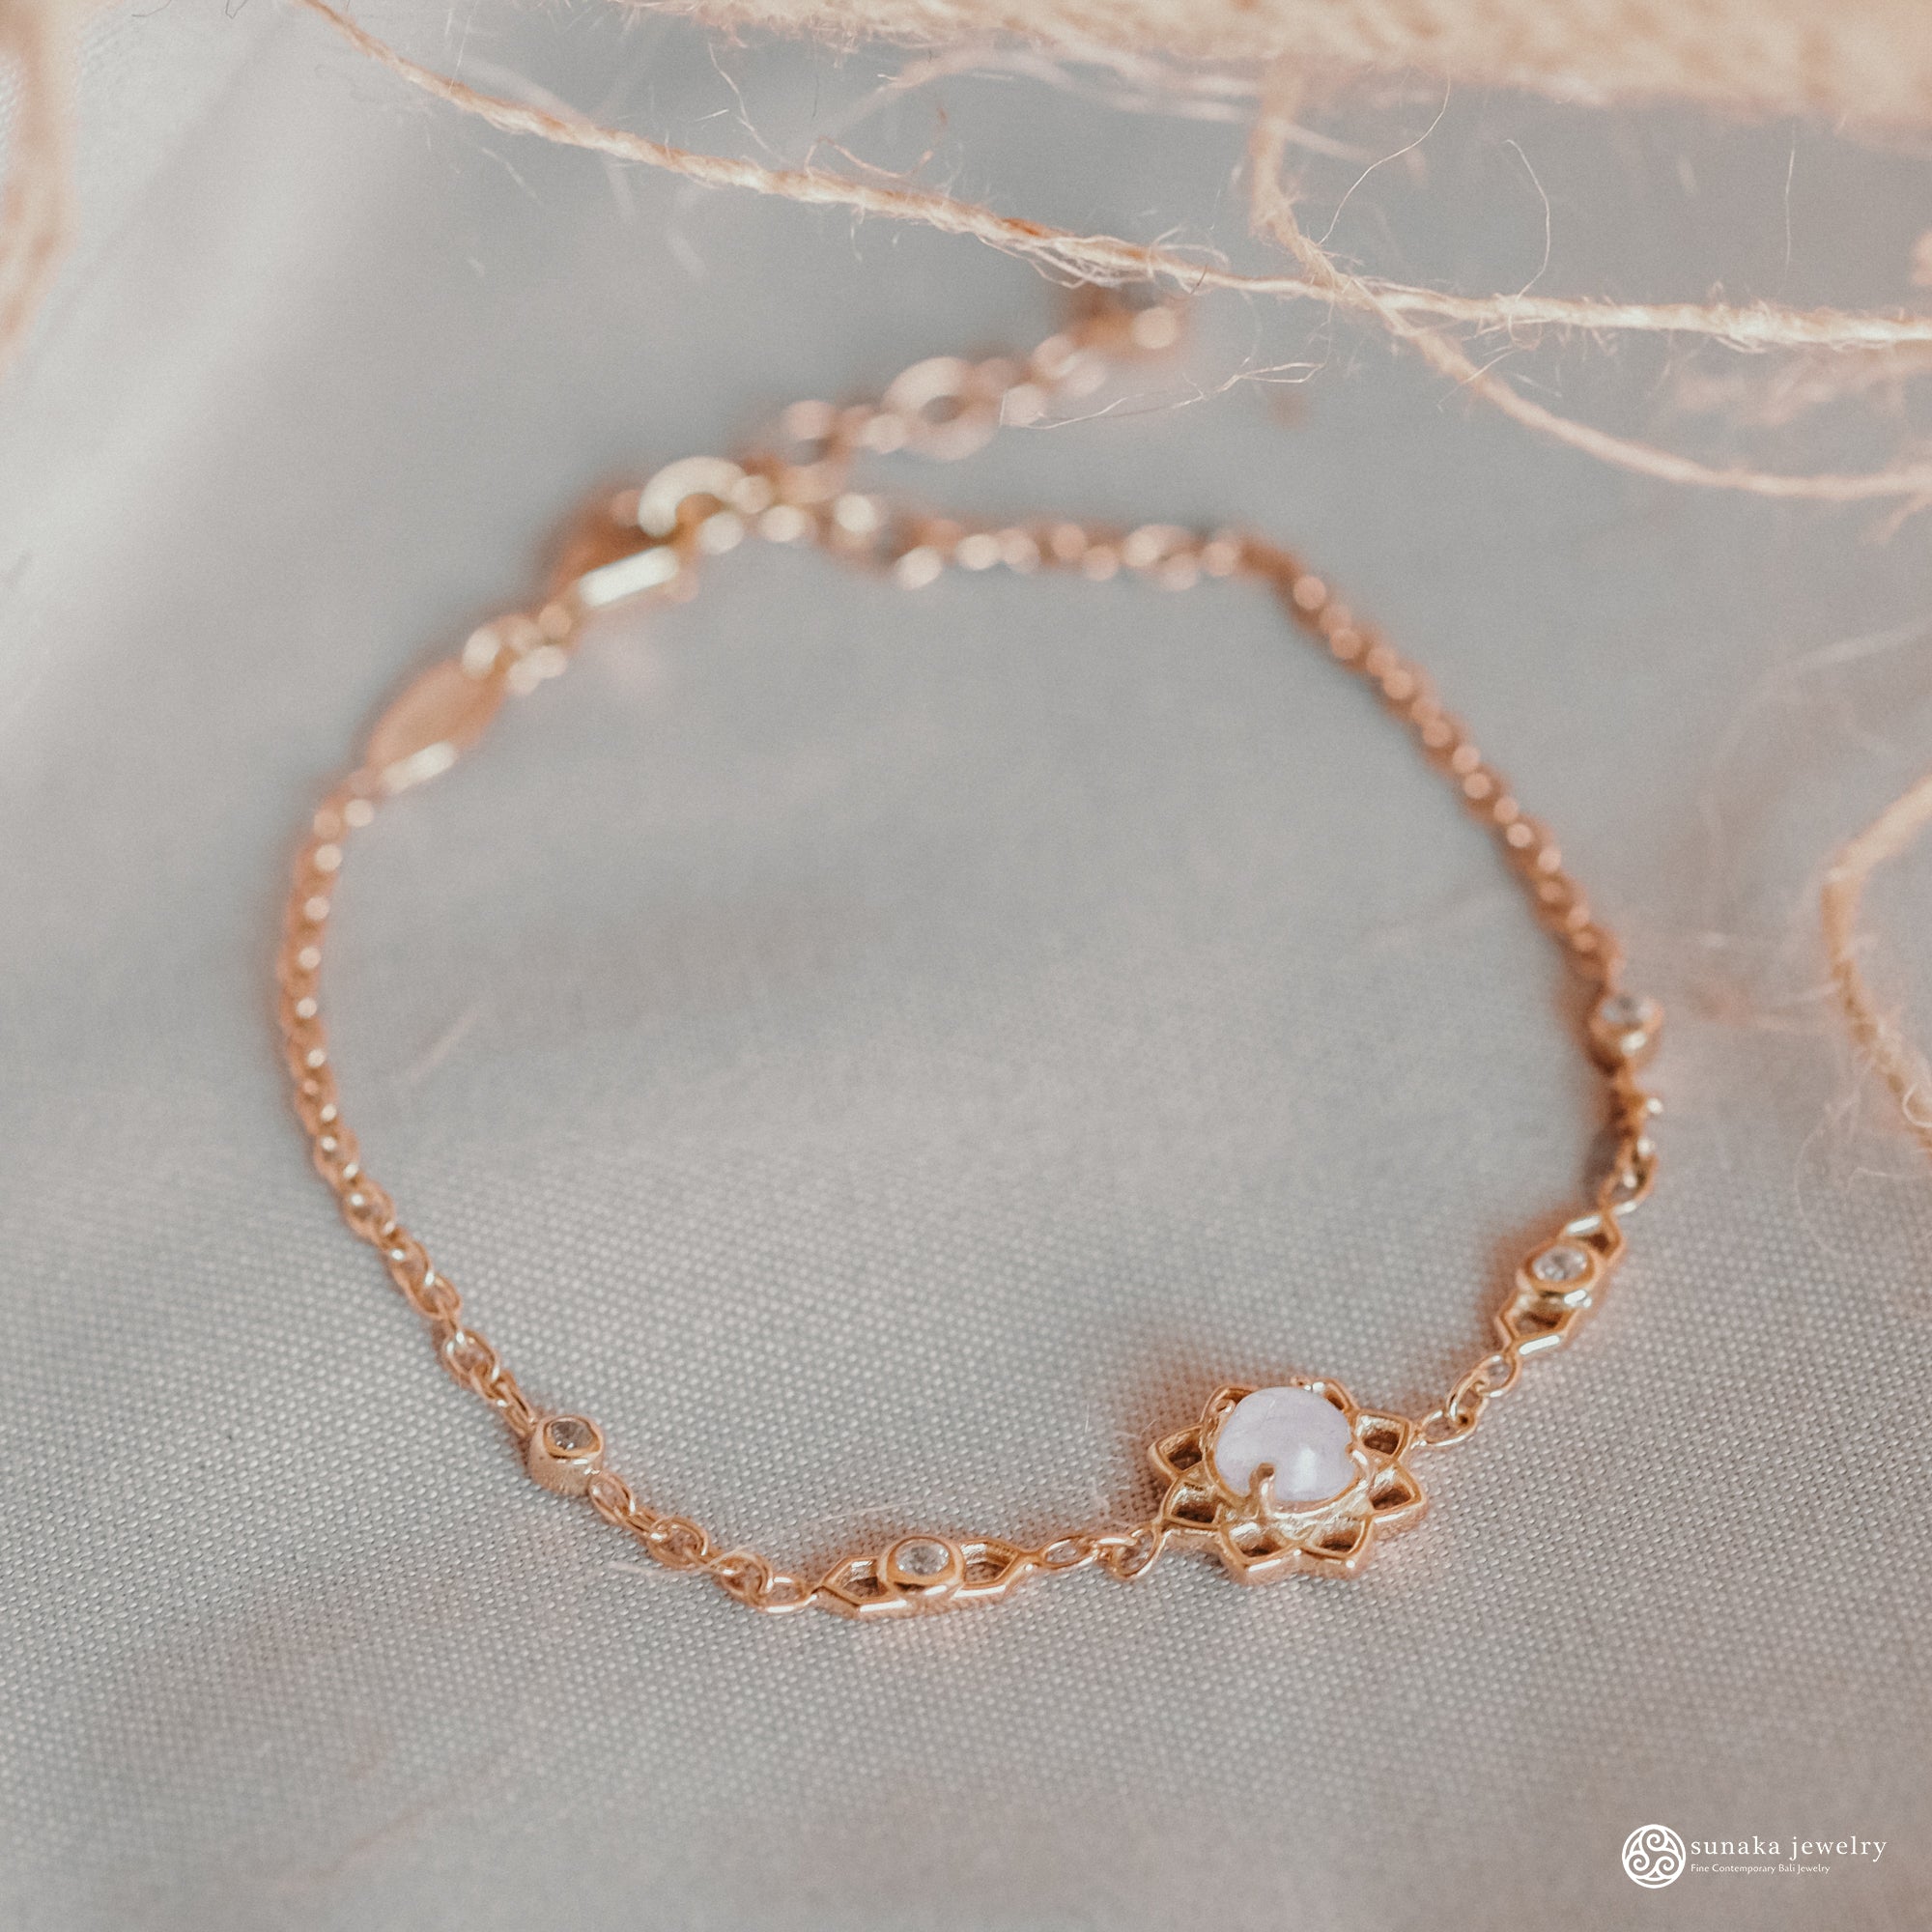 Moonstone Chain Bracelet Rose Gold Plated in Sterling Silver